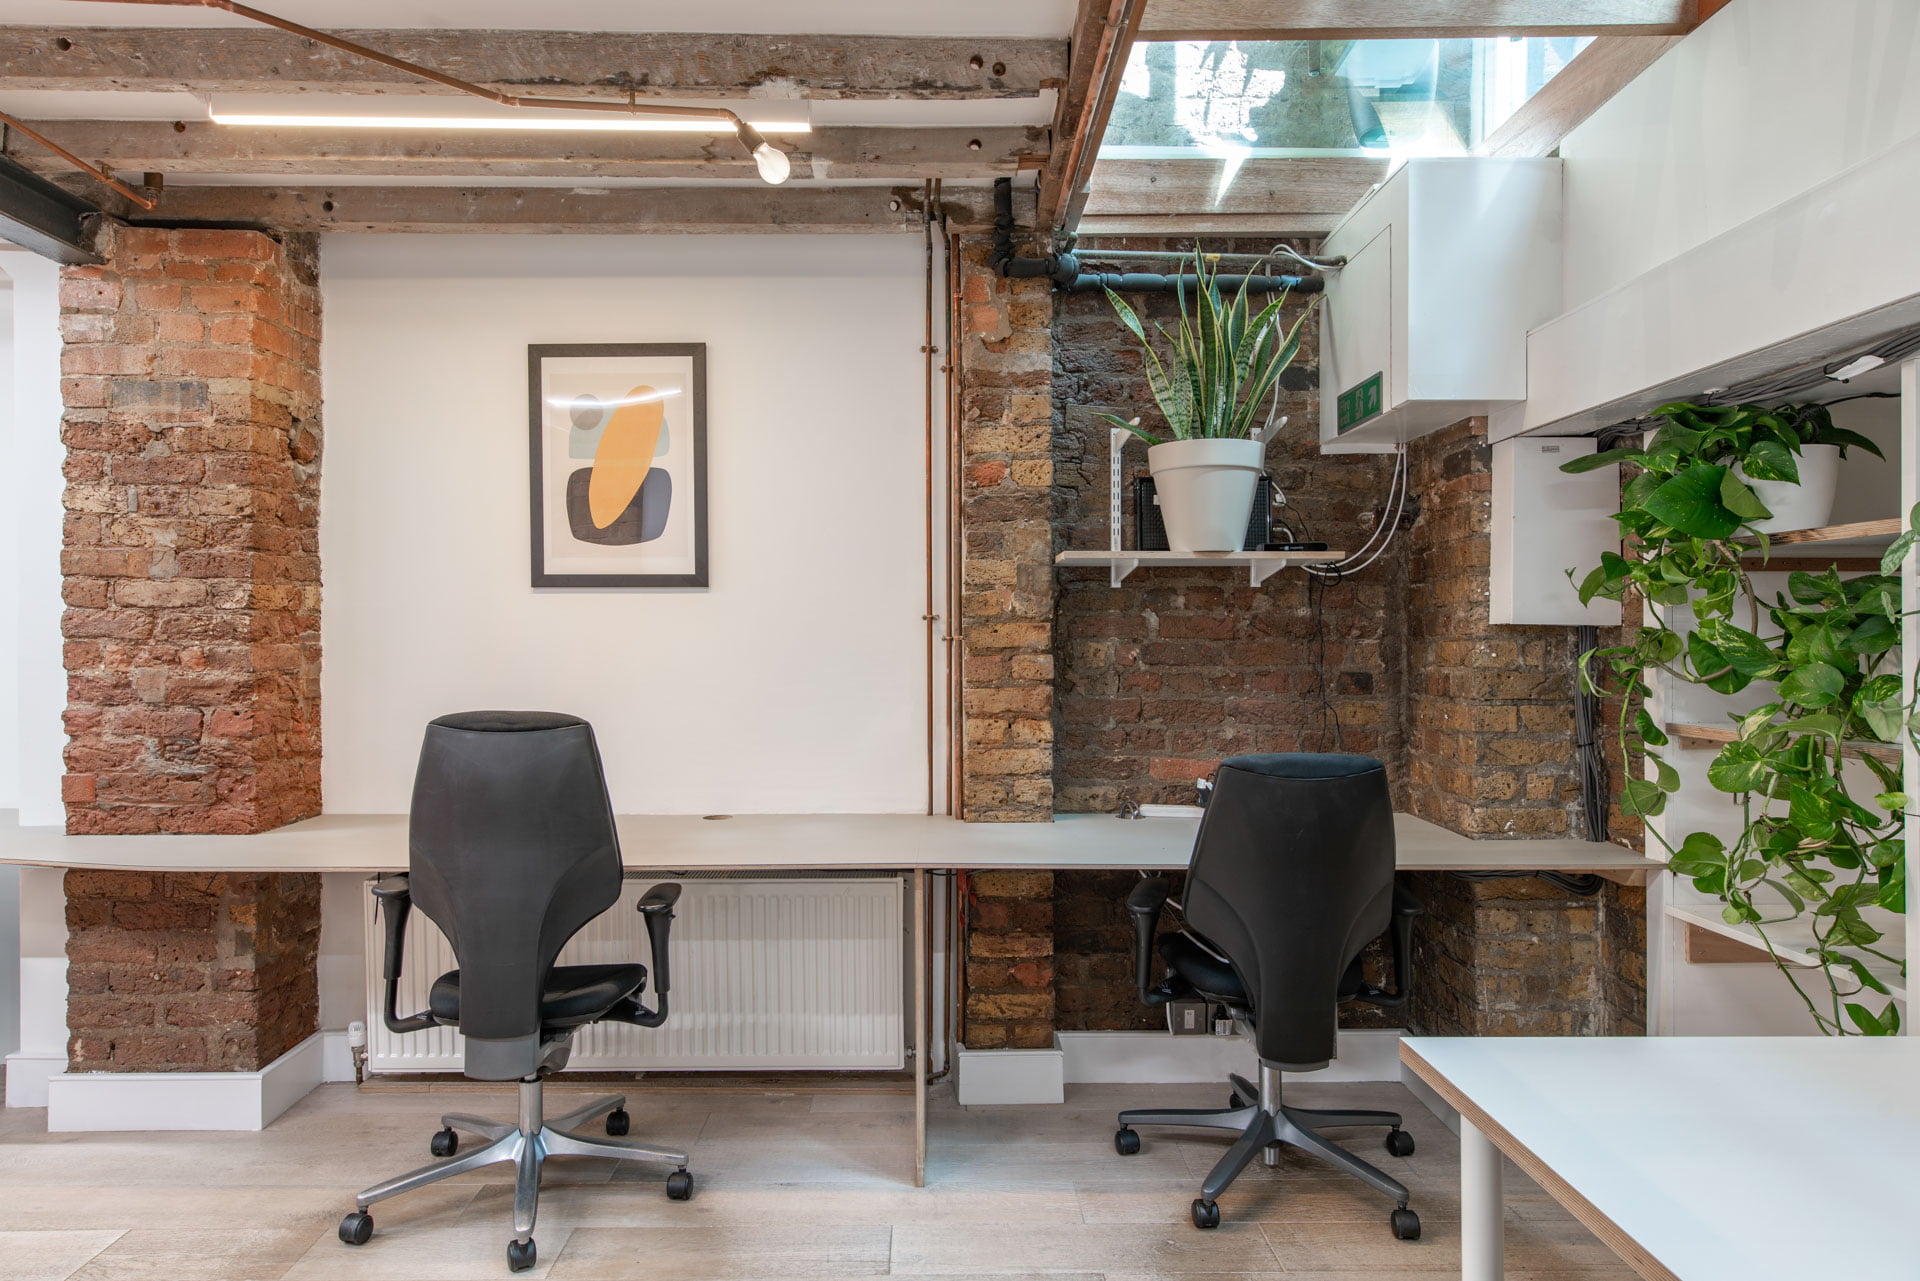 Finding managed offices for rent in London - Where can I find managed offices in London?